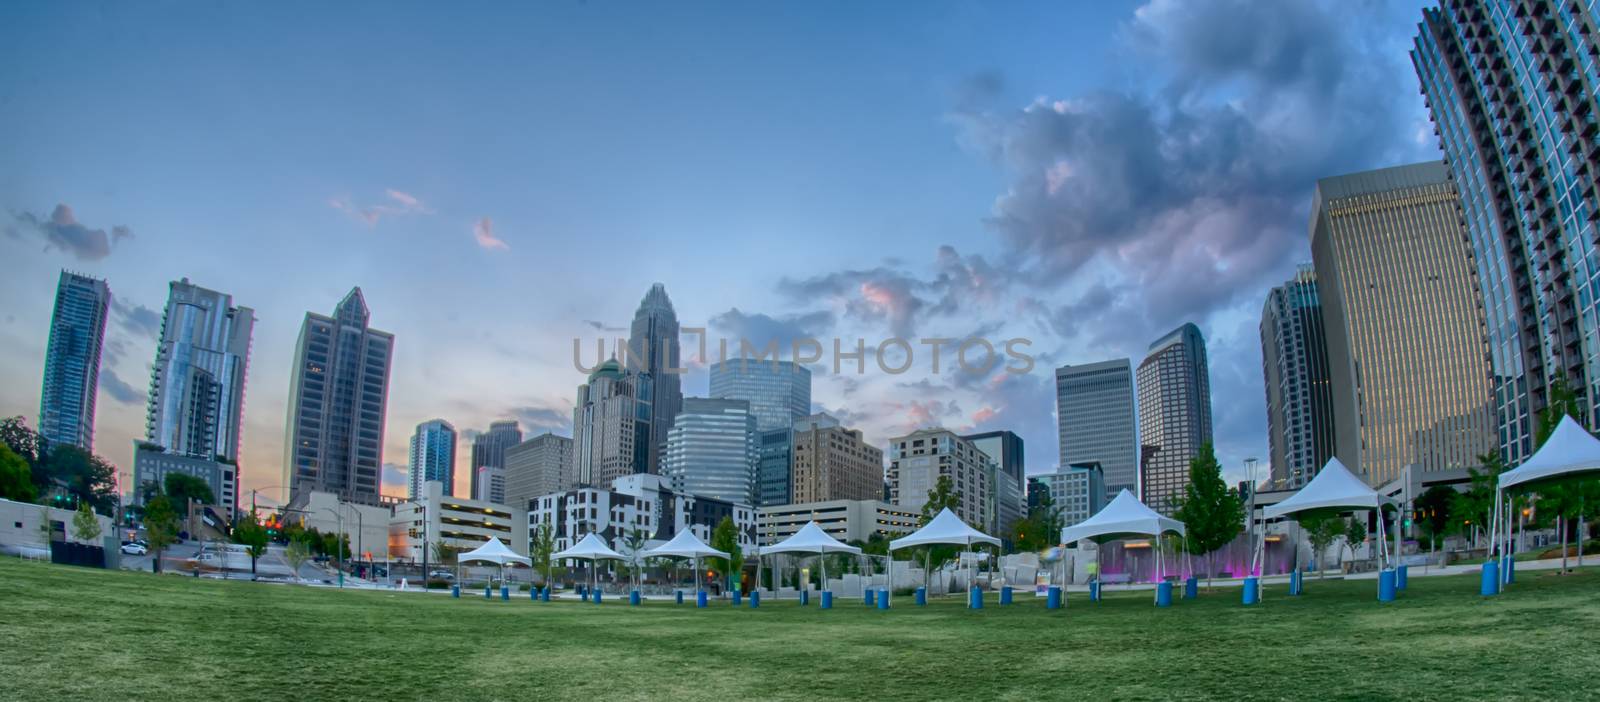 August 29, 2014, Charlotte, NC - view of Charlotte skyline at ni by digidreamgrafix